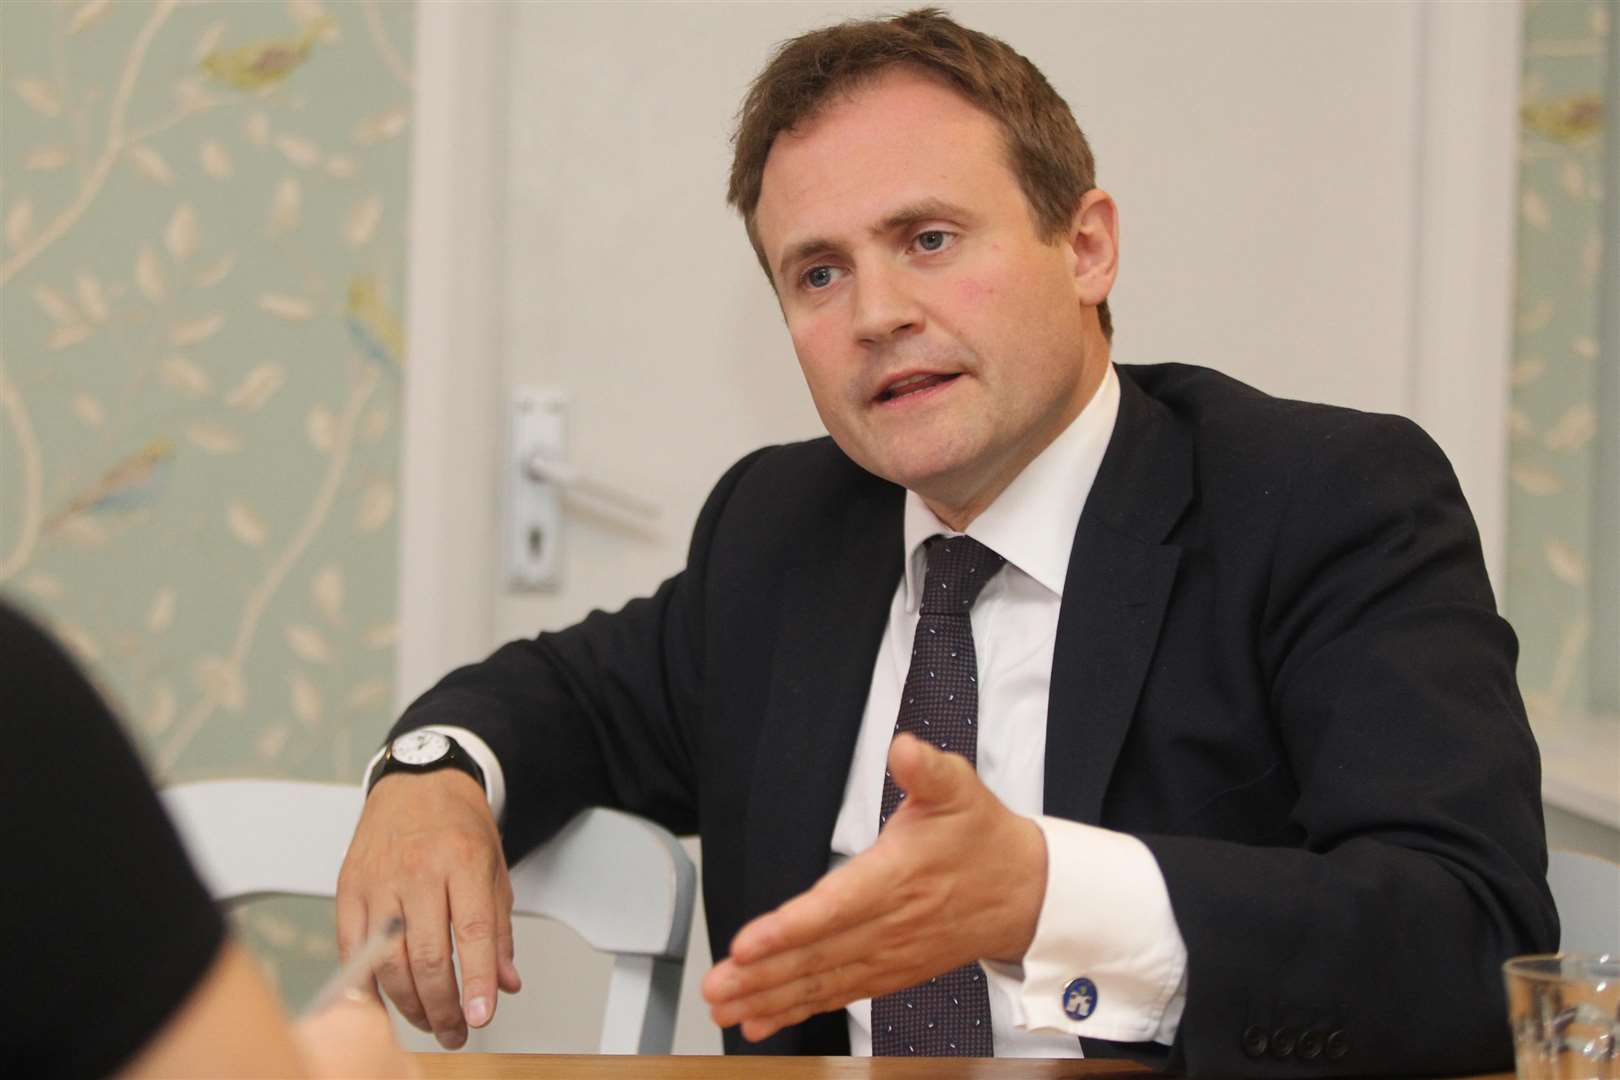 Tom Tugendhat is going to raise the issue with the regulator. Picture: John Westhrop.